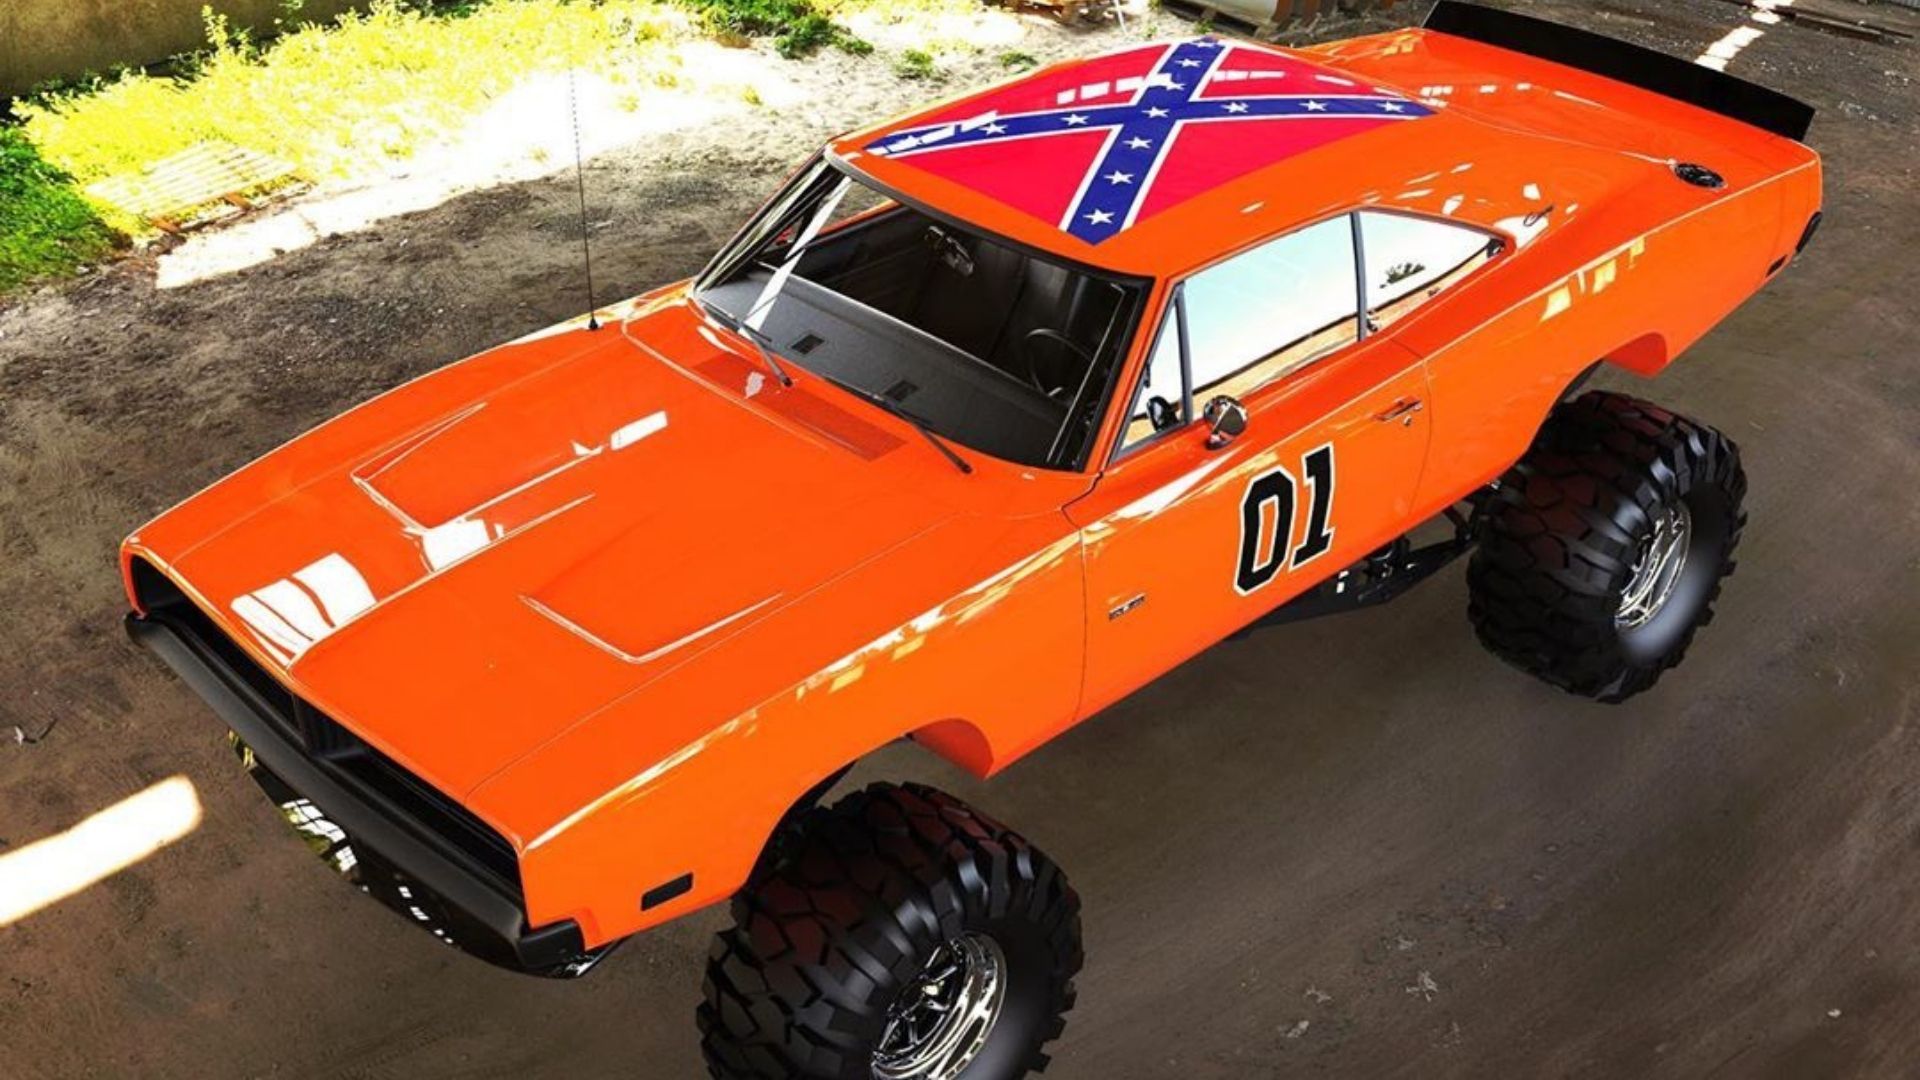 Artist Gives The General Lee A Boost